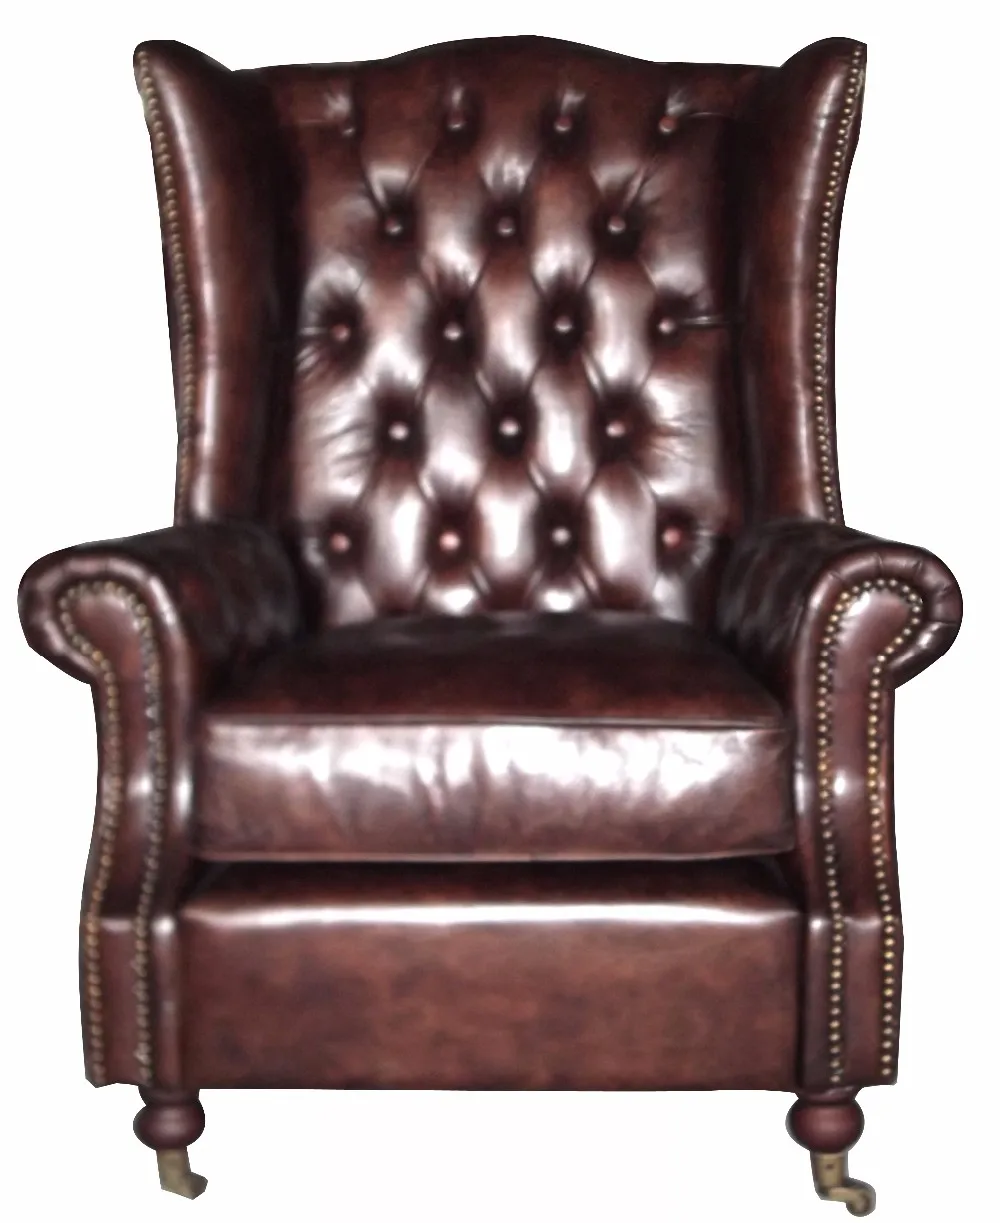 retro leather chesterfield chair armchair for sale  buy chesterfield  armchairleather chesterfield chairchesterfield chairs for sale product on